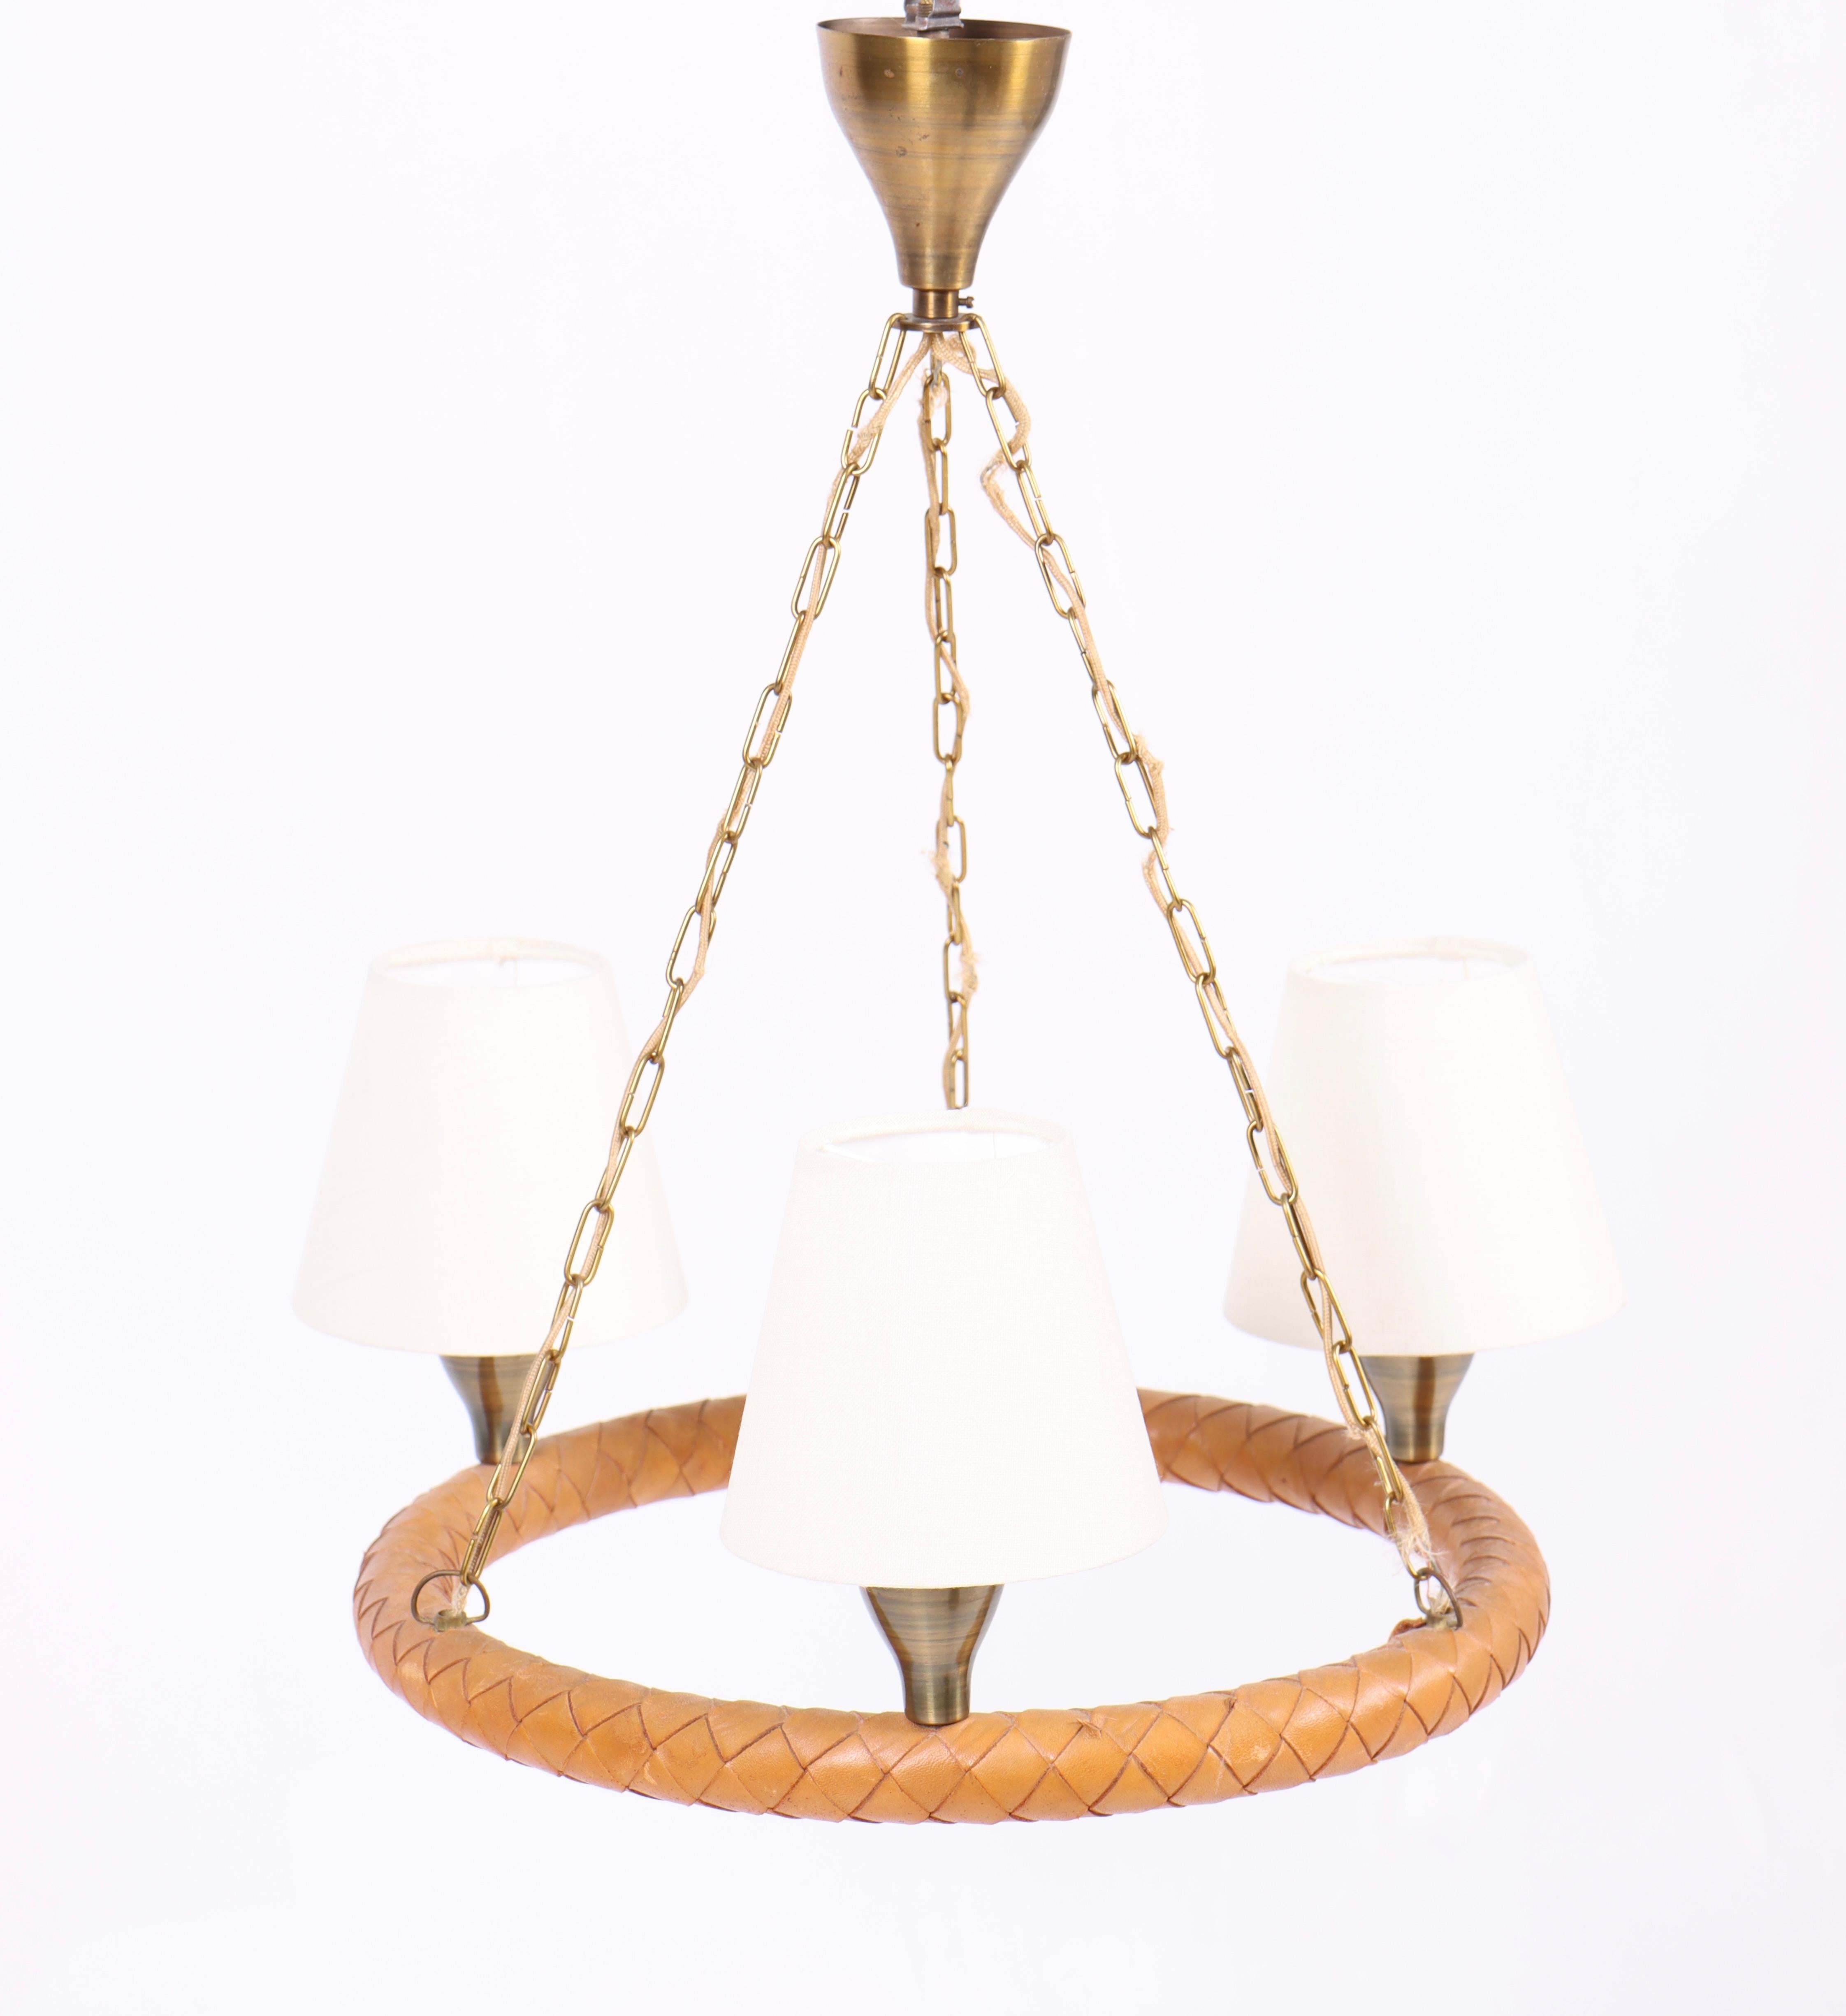 Midcentury Chandelier in Braided Leather by Jo Hammerborg, 1960s For Sale 2